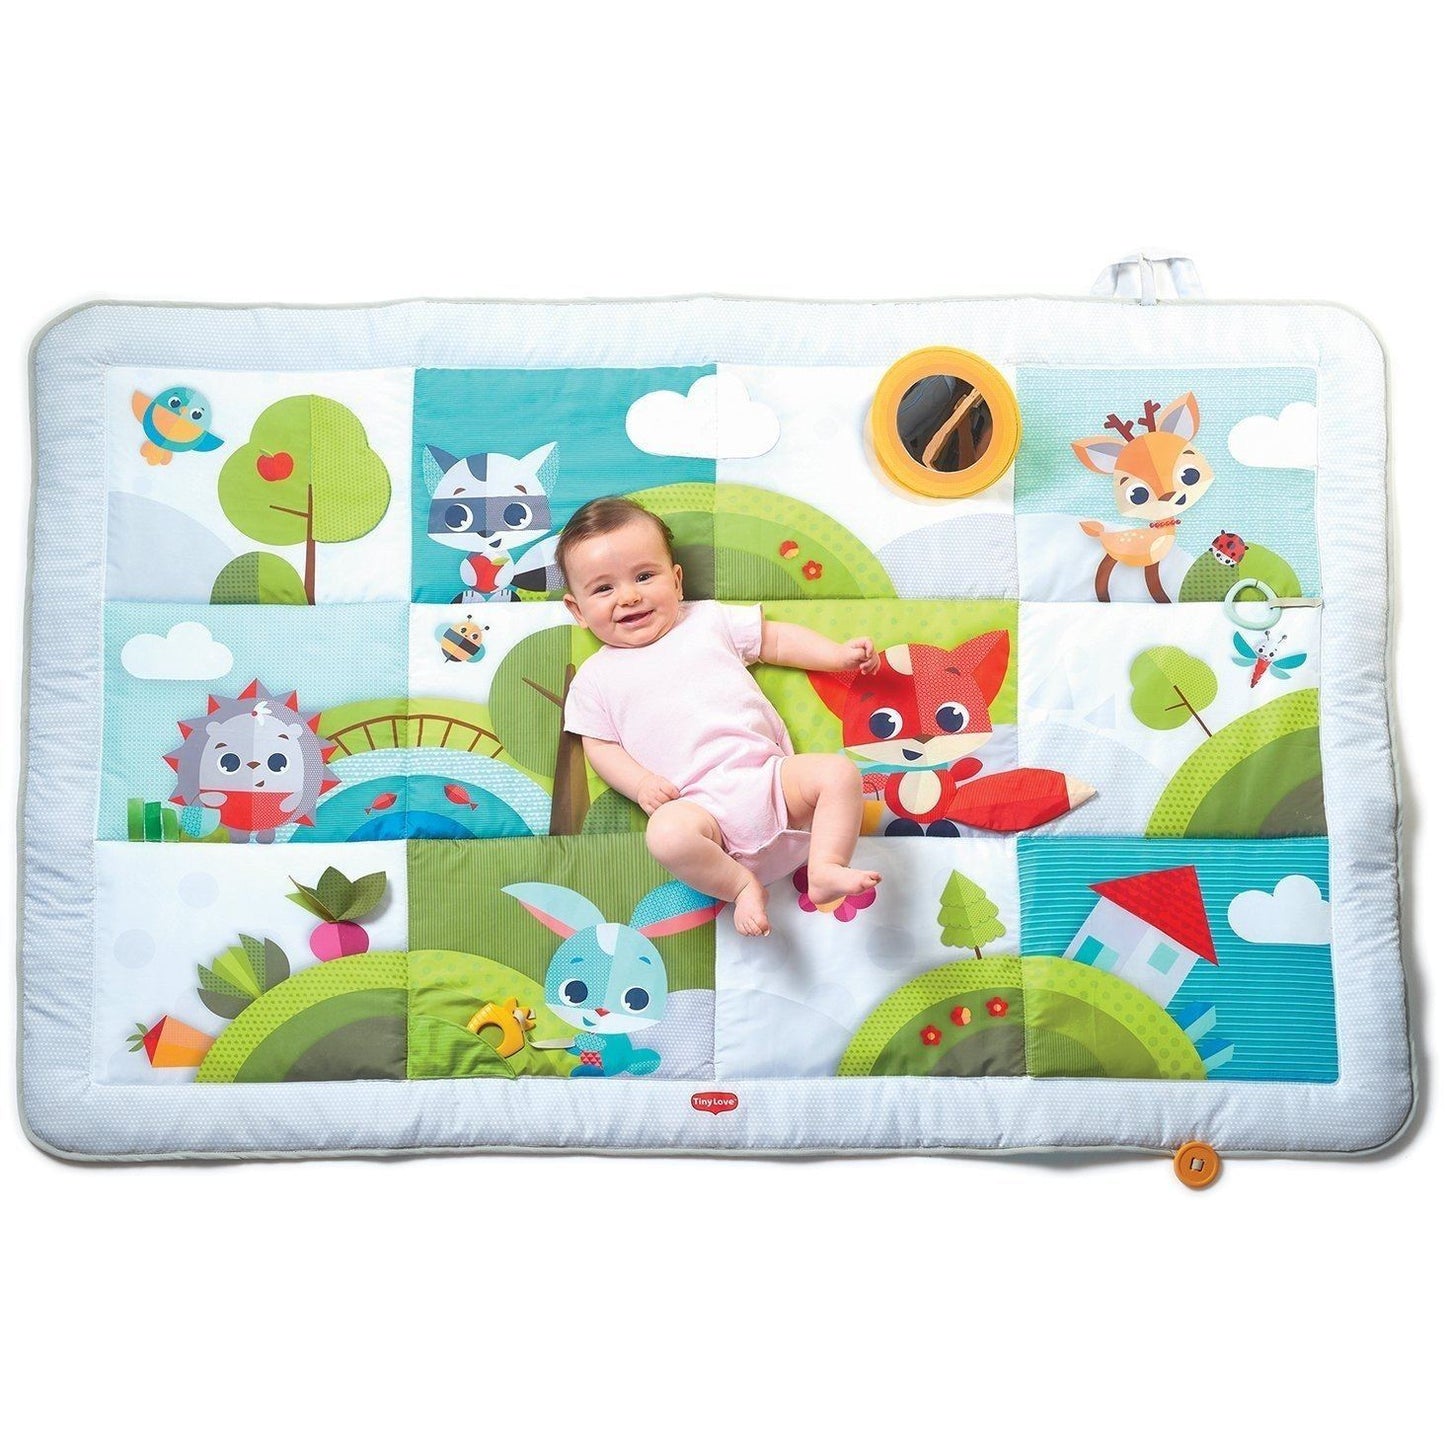 Tiny Love Meadow Days Tapete Super Gigante Bestseller Anne Claire Baby Store 